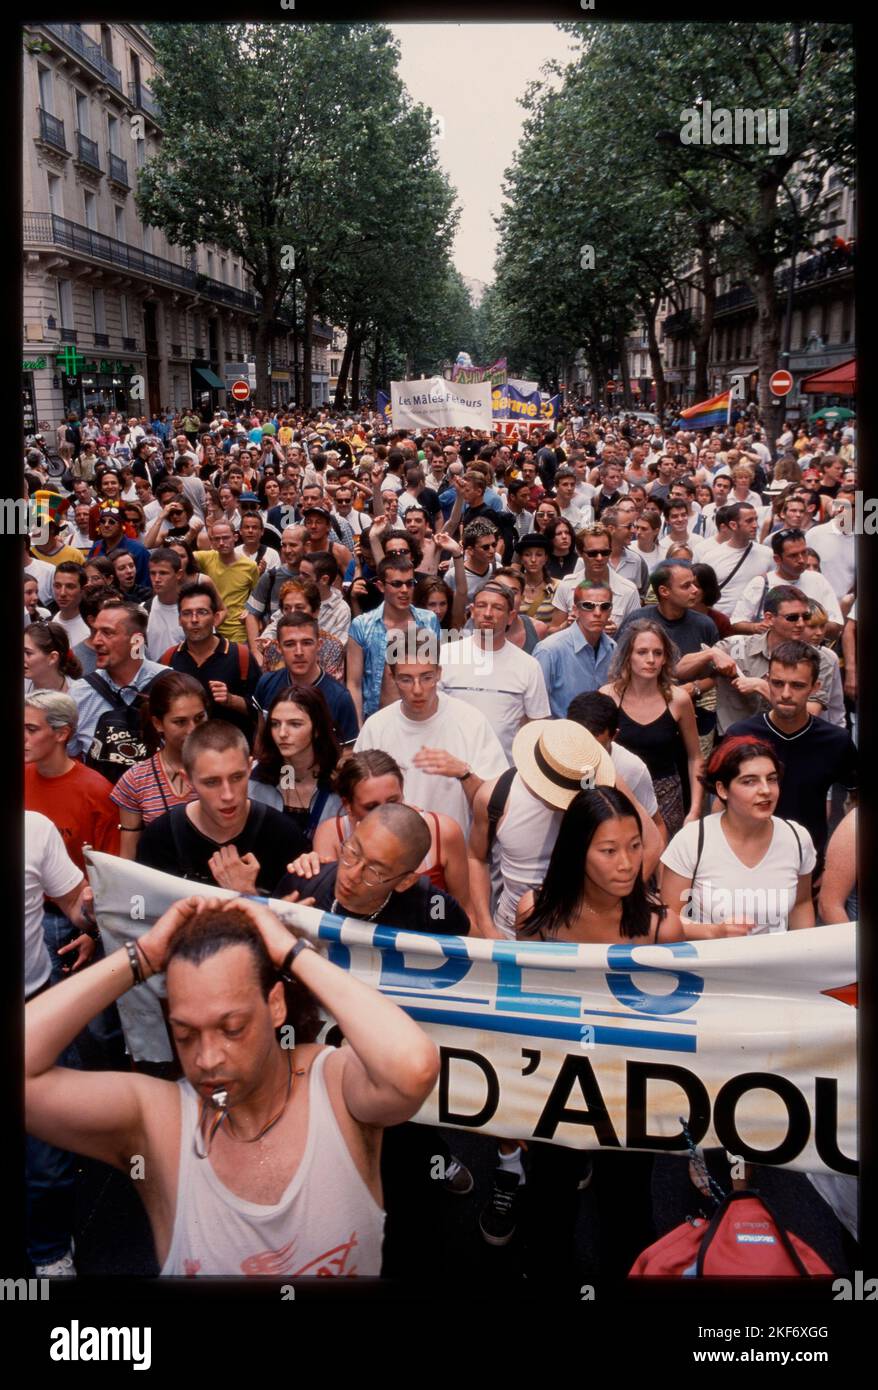 Paris, France, Crowd , AIDES NGO, Aids Activists Protesting  with Signs at Gay Pride, LGBTQI+, aids 1990s Stock Photo